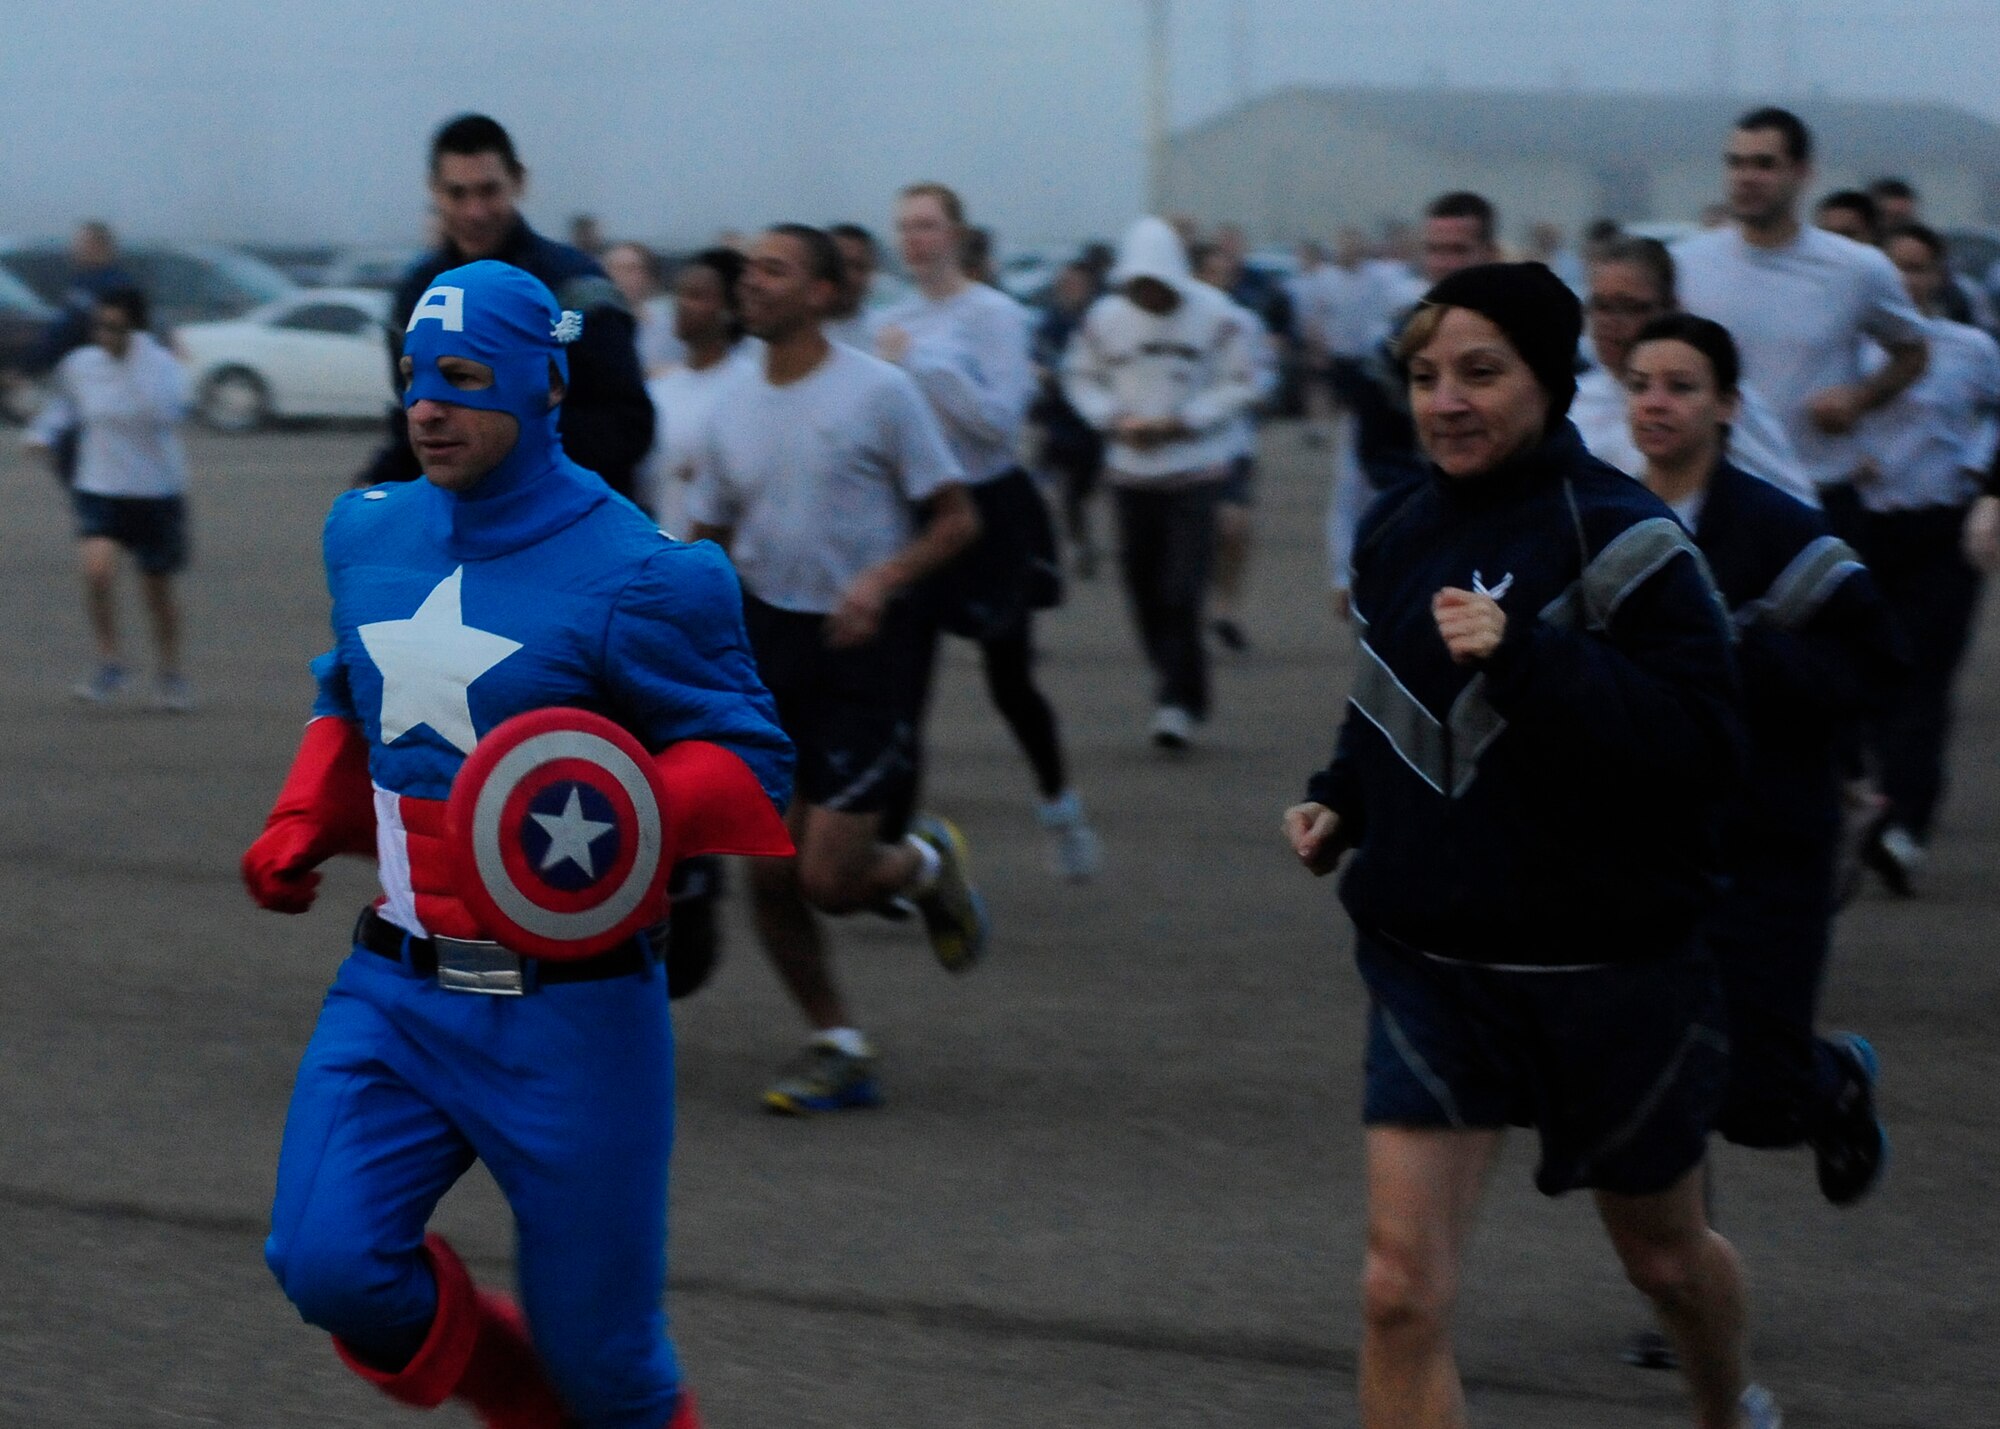 VANDENBERG AIR FORCE BASE, Calif. -- Lt. Col. Daniel Murray, 30th Medical Group aerospace medicine chief, leads a group of runners dressed during the Wing Run here Wednesday, Oct. 31, 2012. Team V members were invited to participate in costume in celebration of Halloween. (U.S. Air Force photo/Michael Peterson)